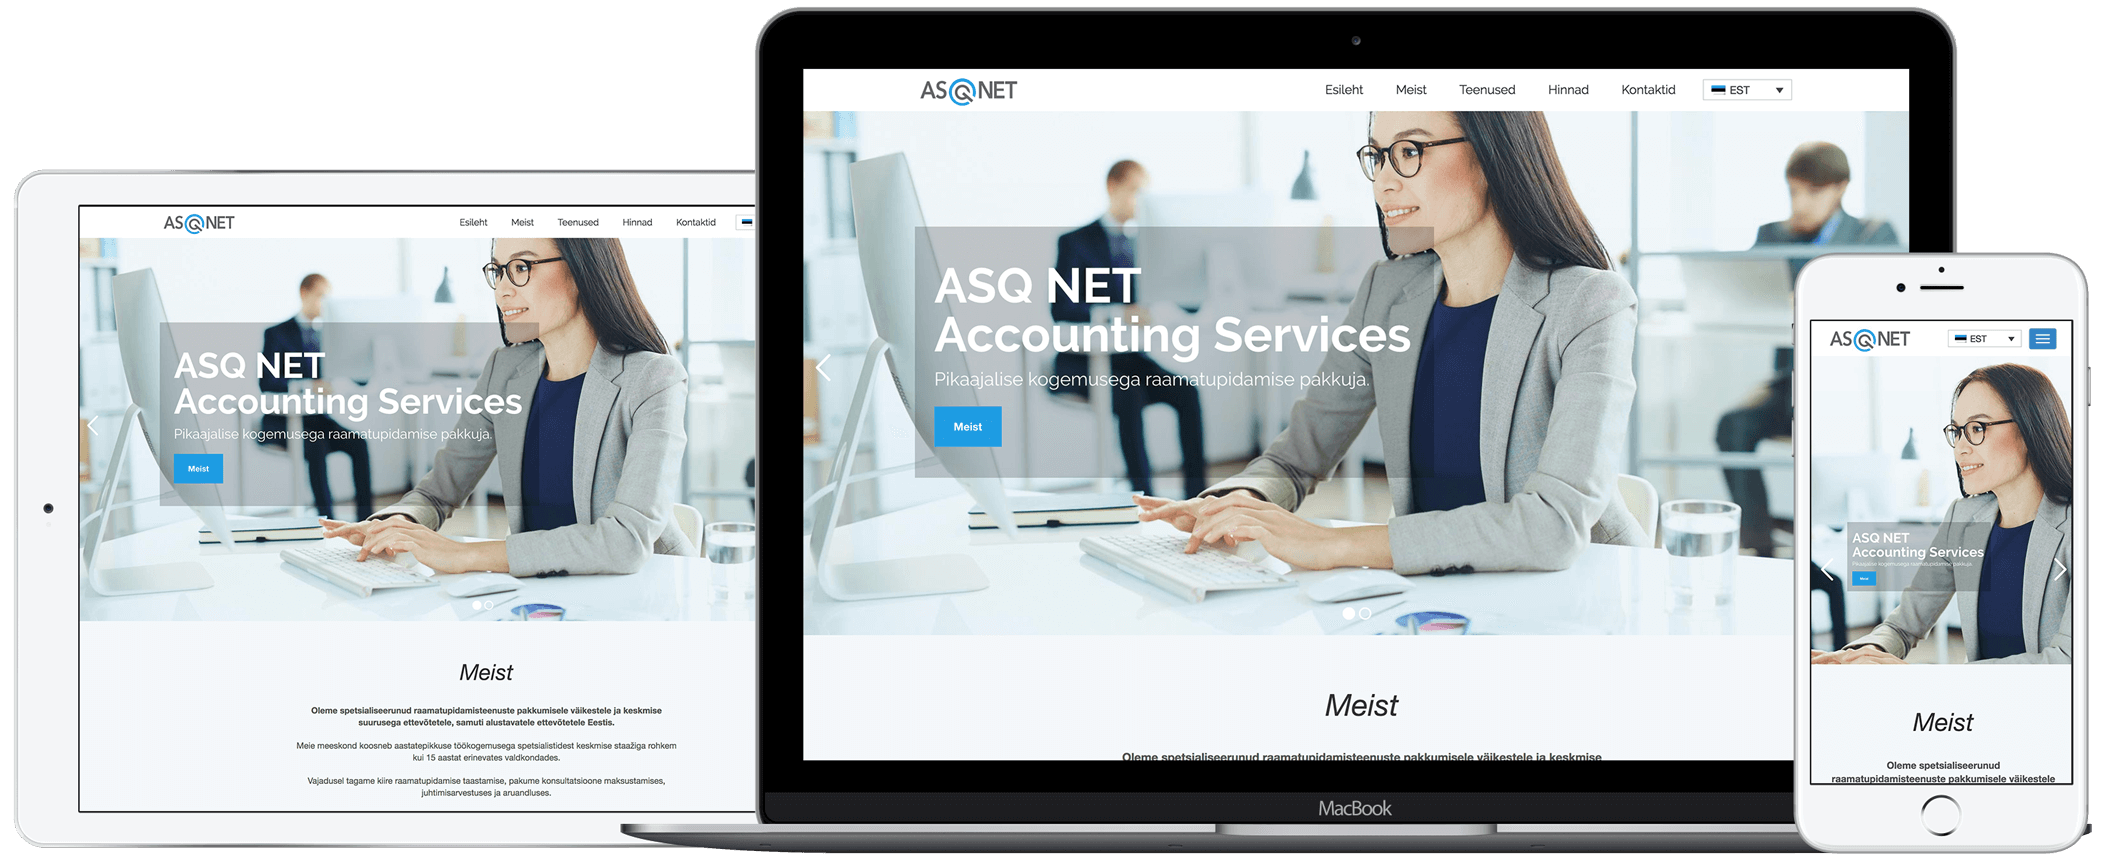 iWeb's web design for ASQ NET, a leader in accounting services